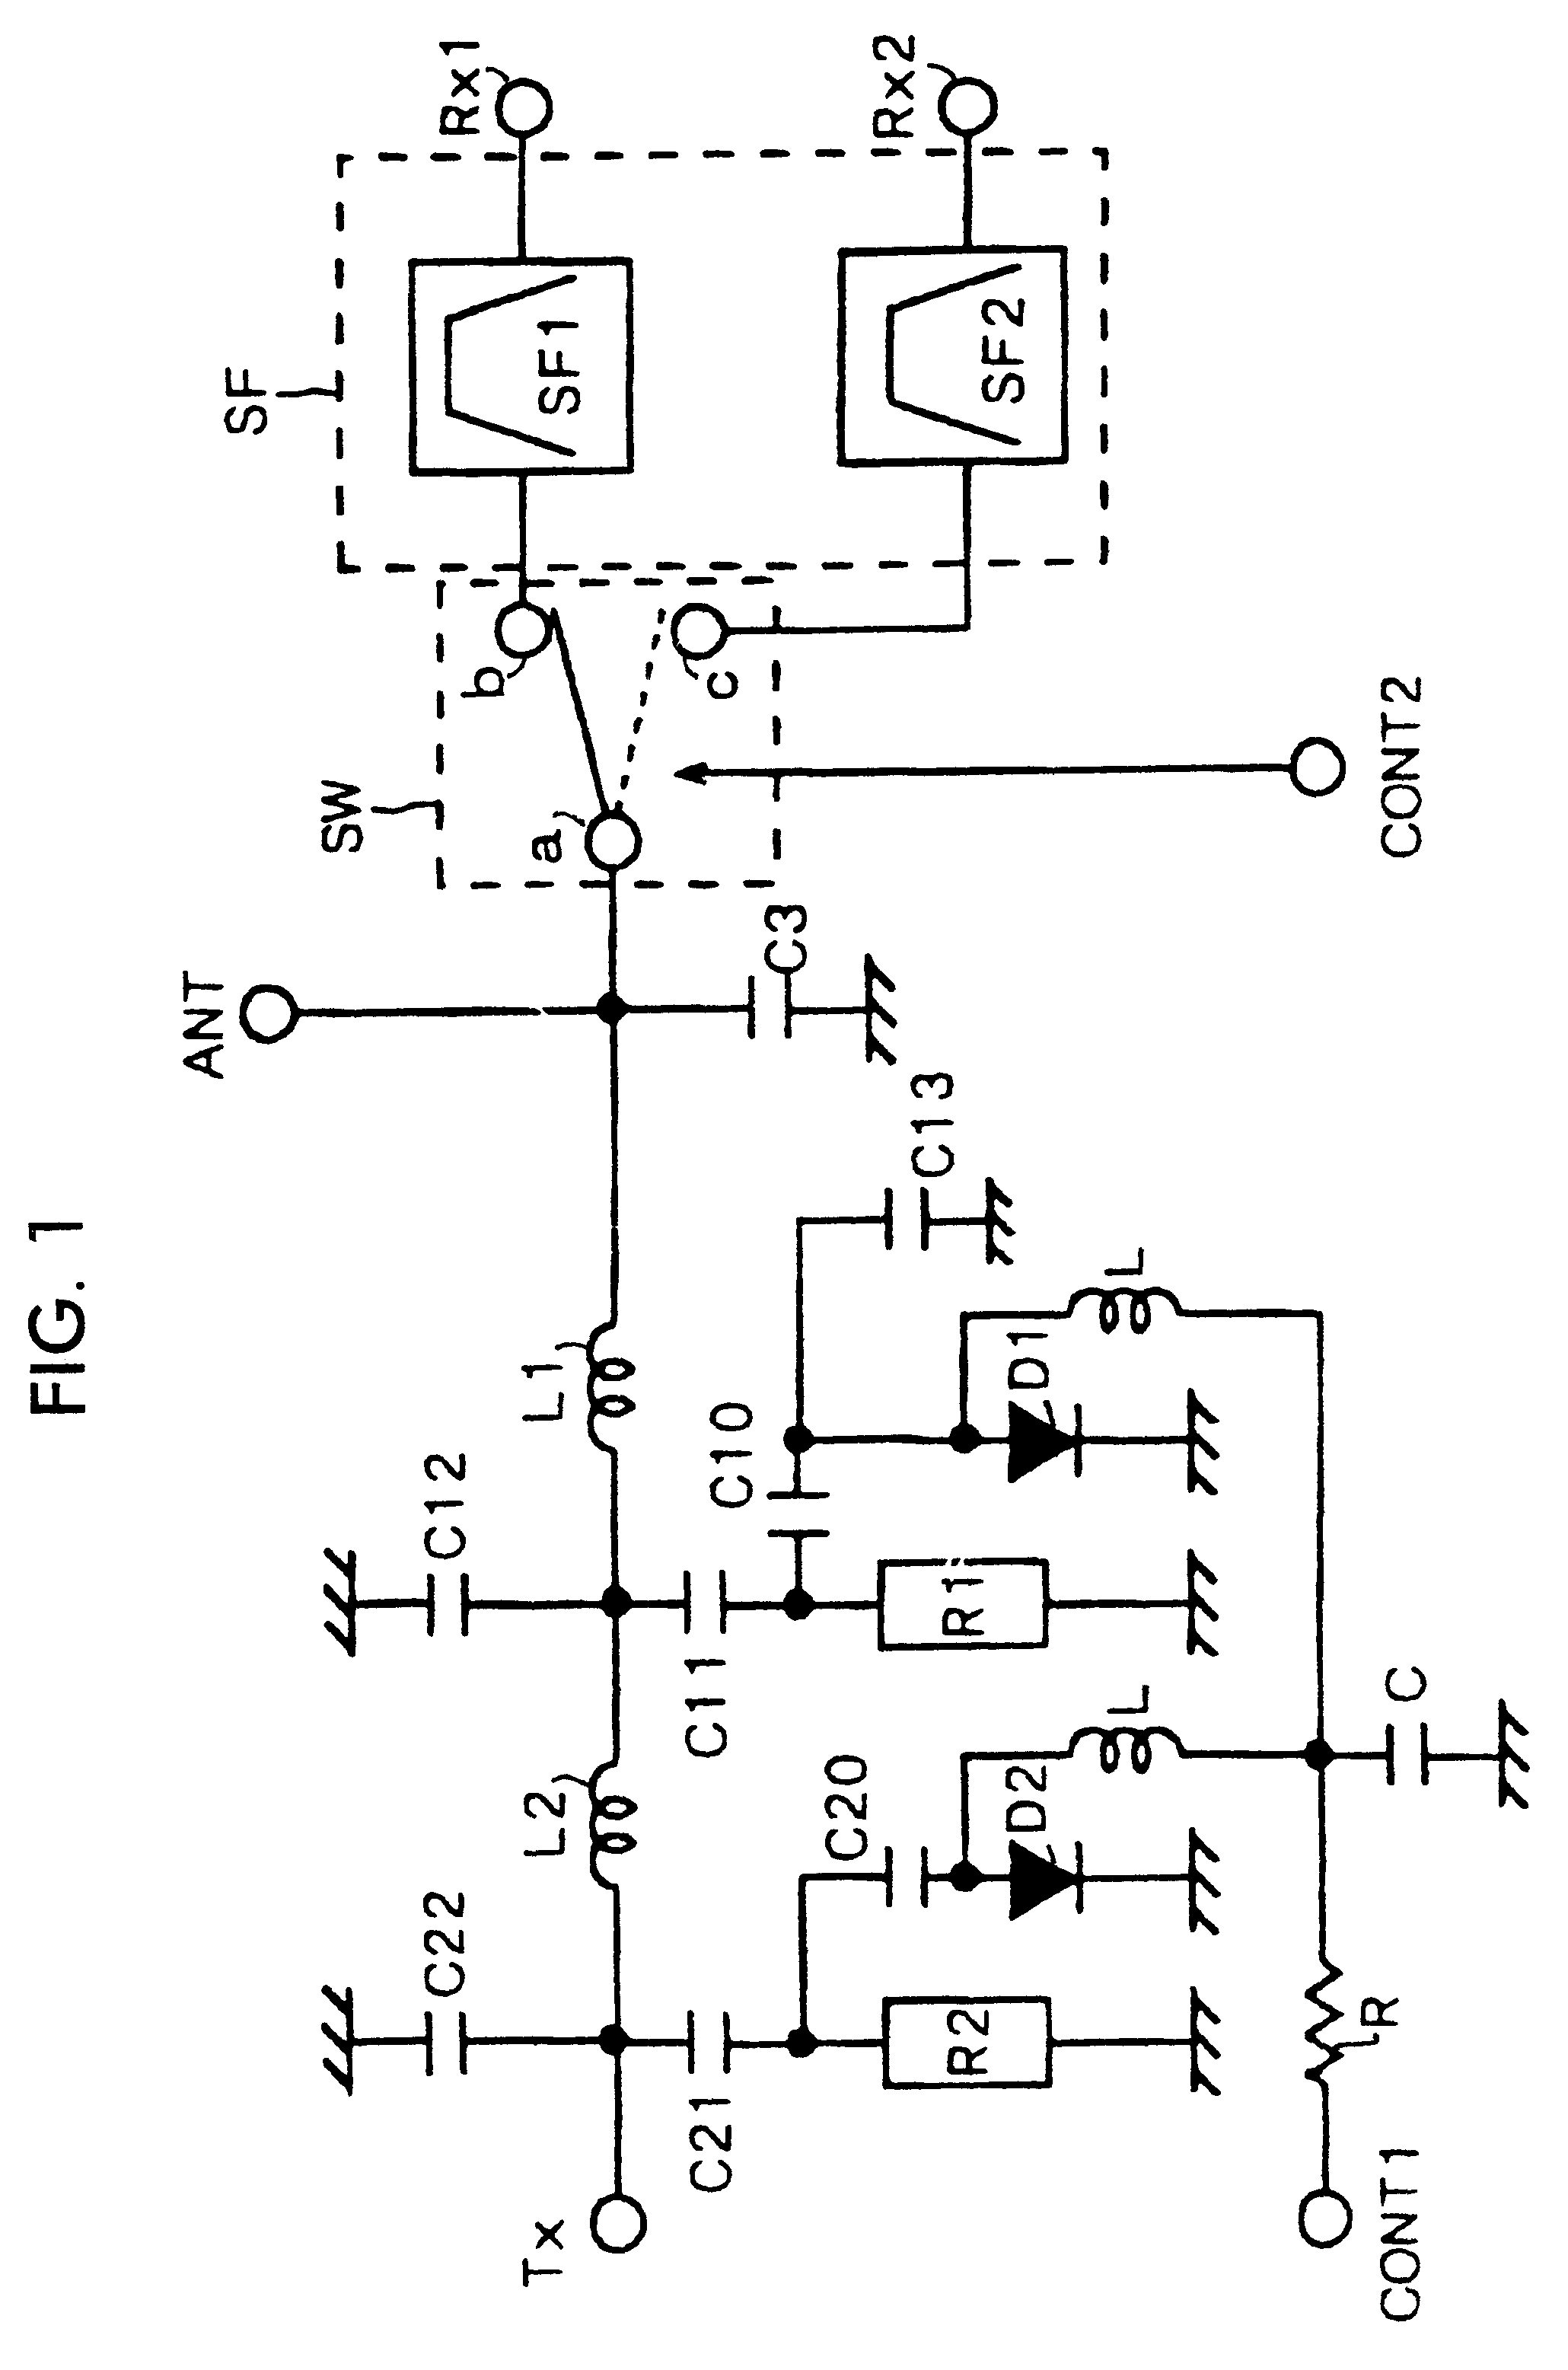 Duplexer and communication apparatus with first and second filters, the second filter having plural switch selectable saw filters